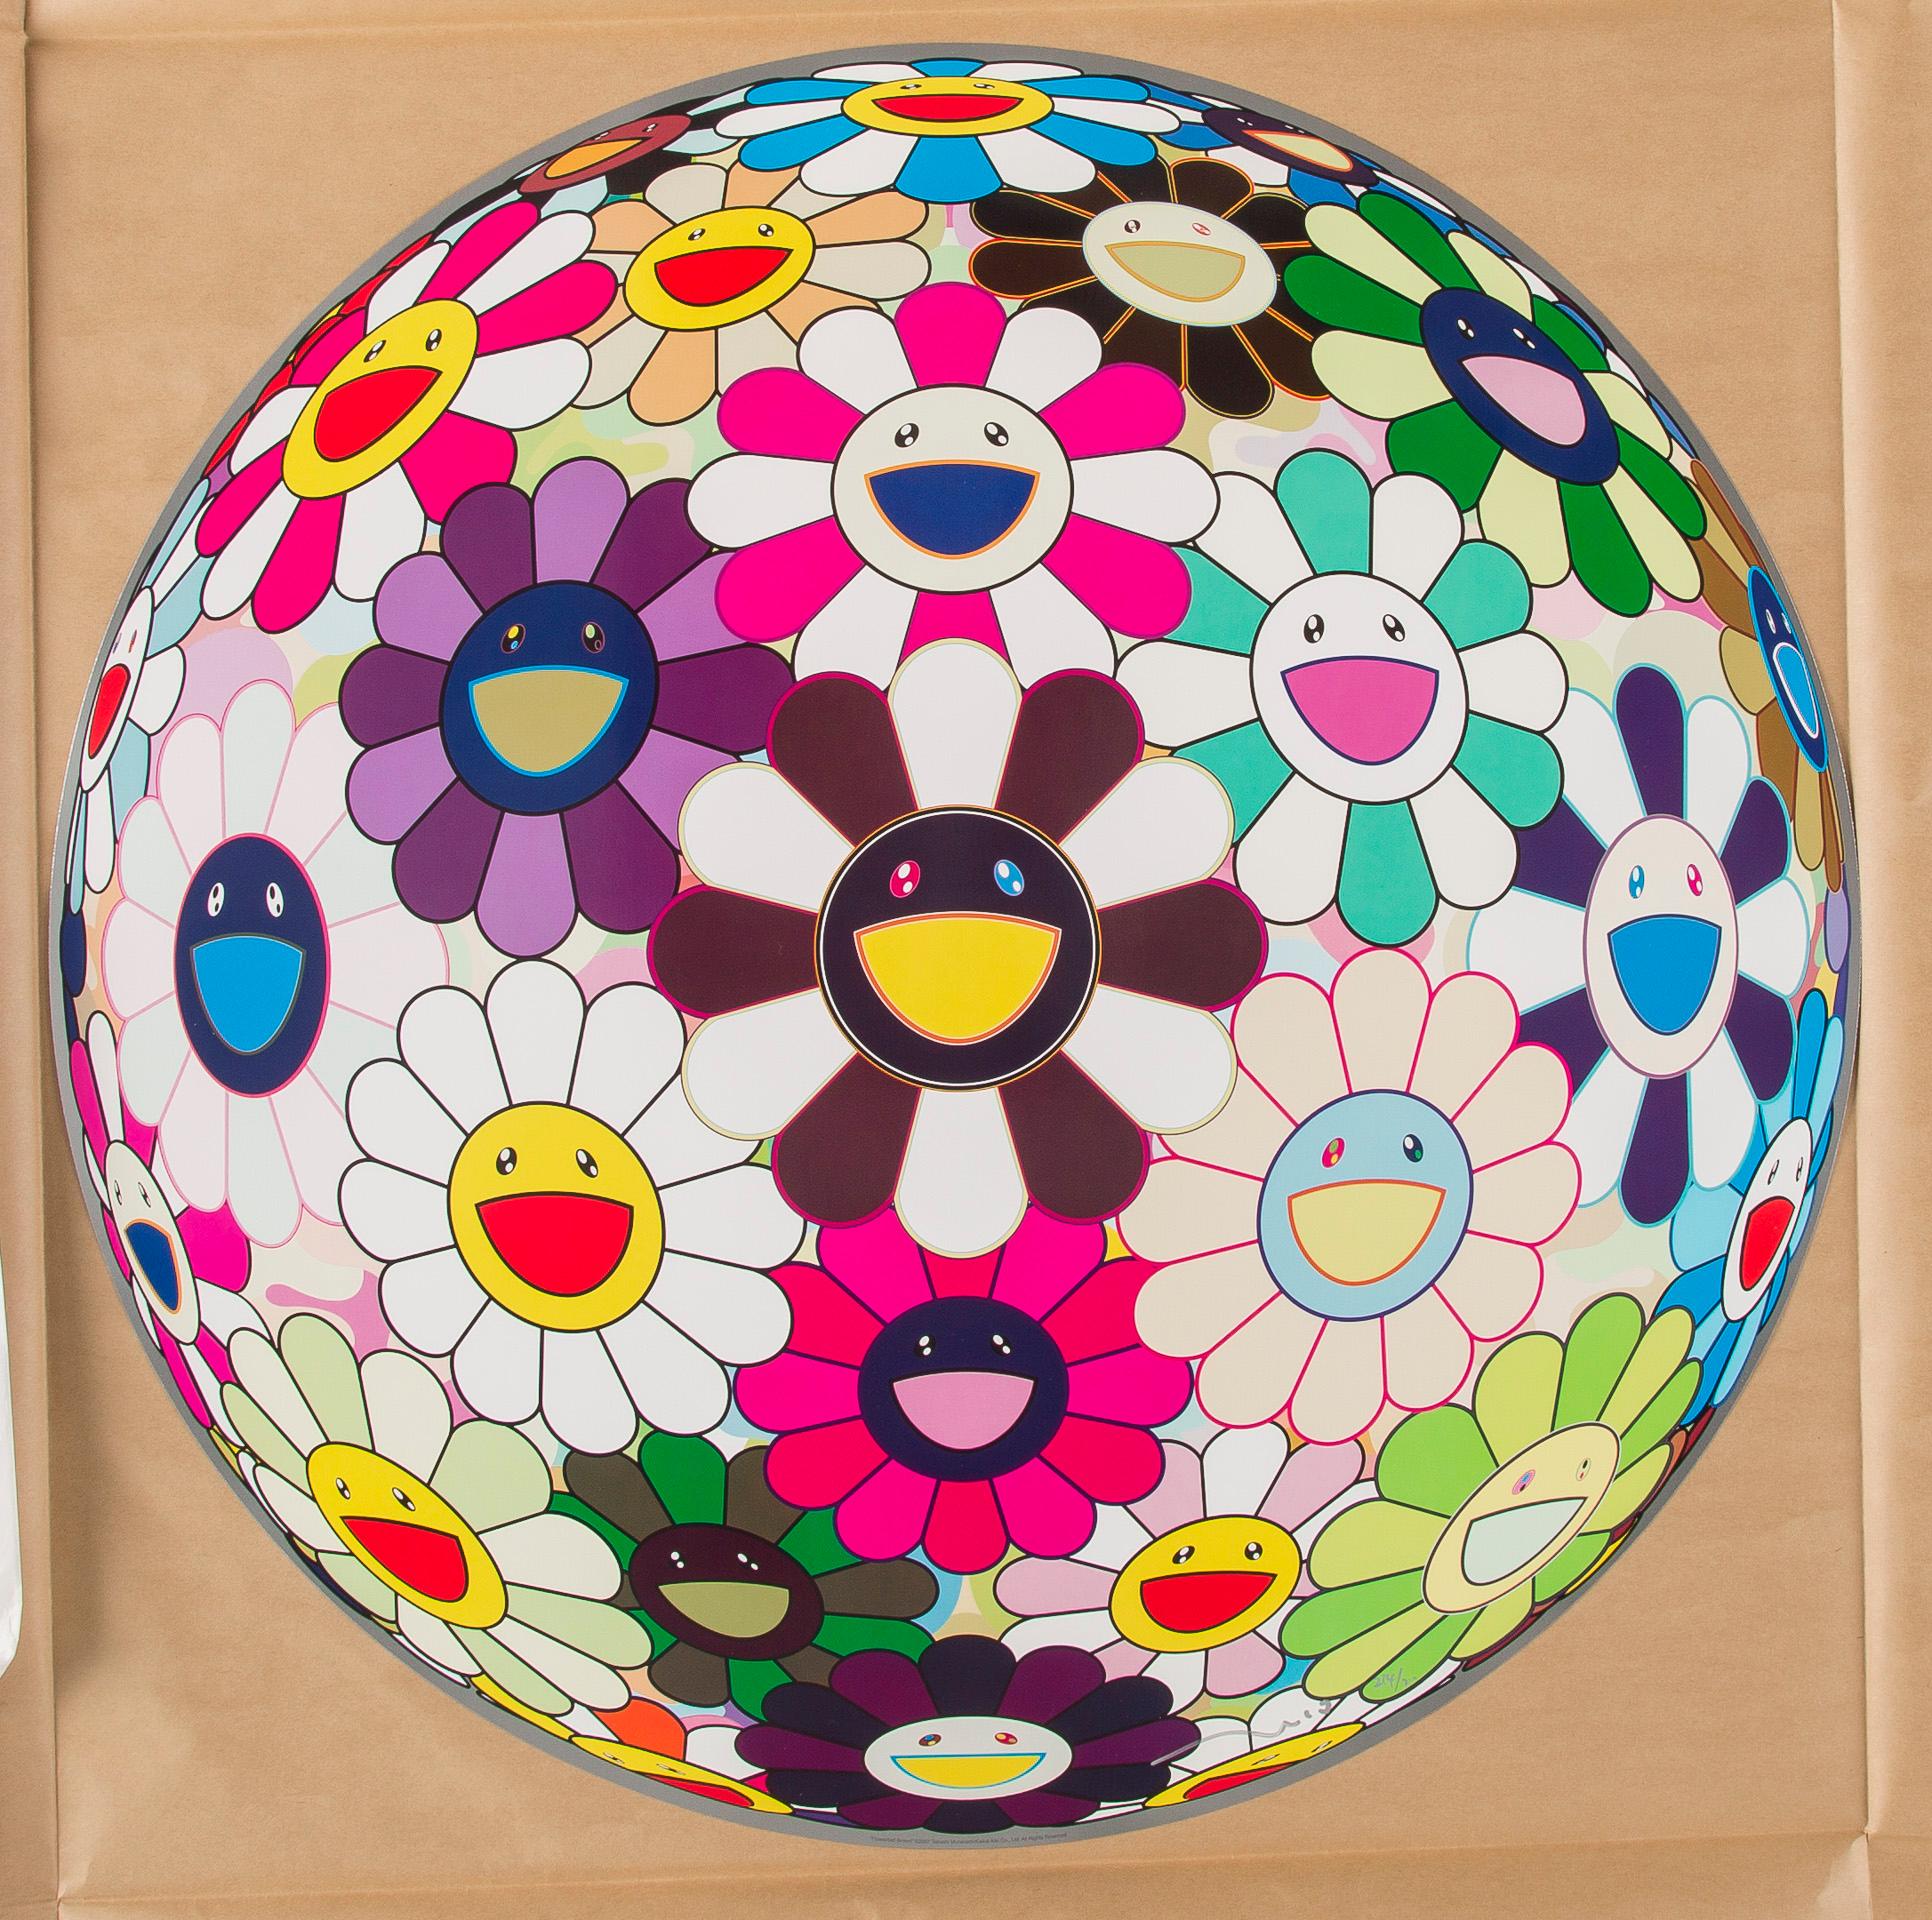 Flowerball Brown. Limited Edition (print) by Murakami signed and numbered. - Print by Takashi Murakami